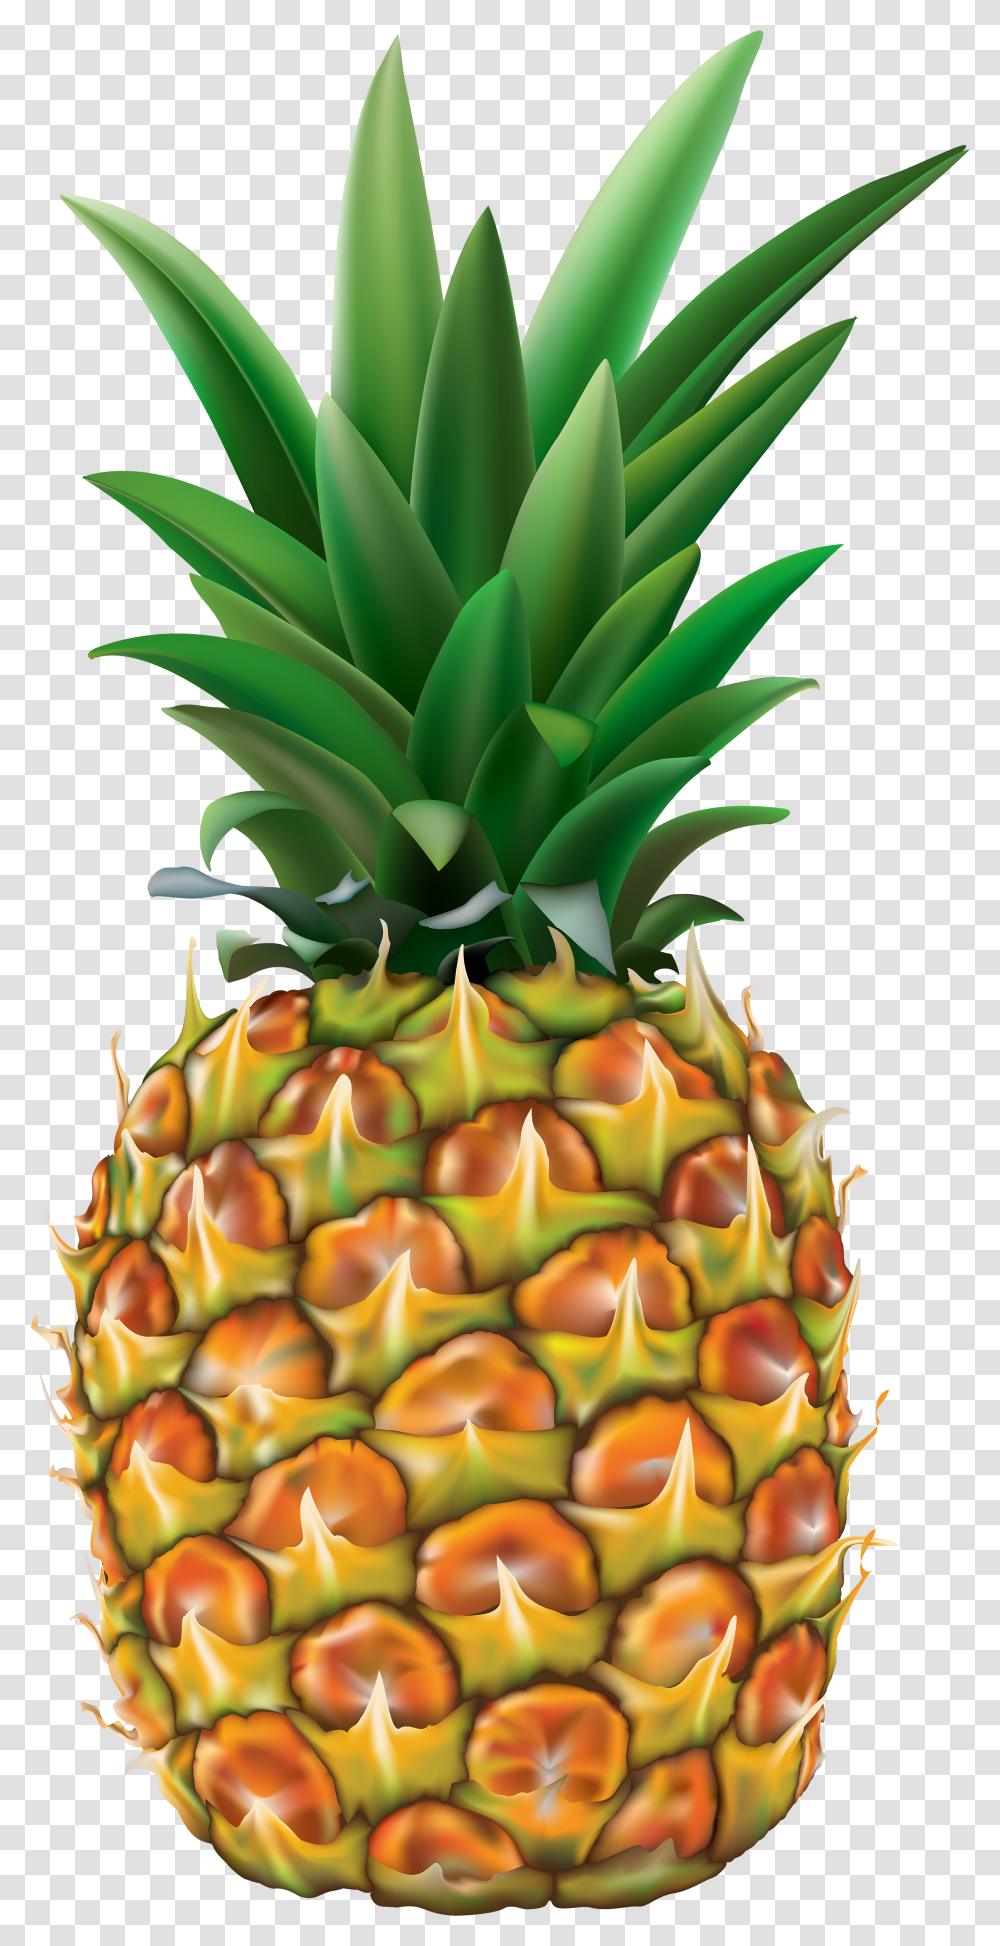 Pineapple Clipart Background Pencil And Pineapple Clipart Transparent Png